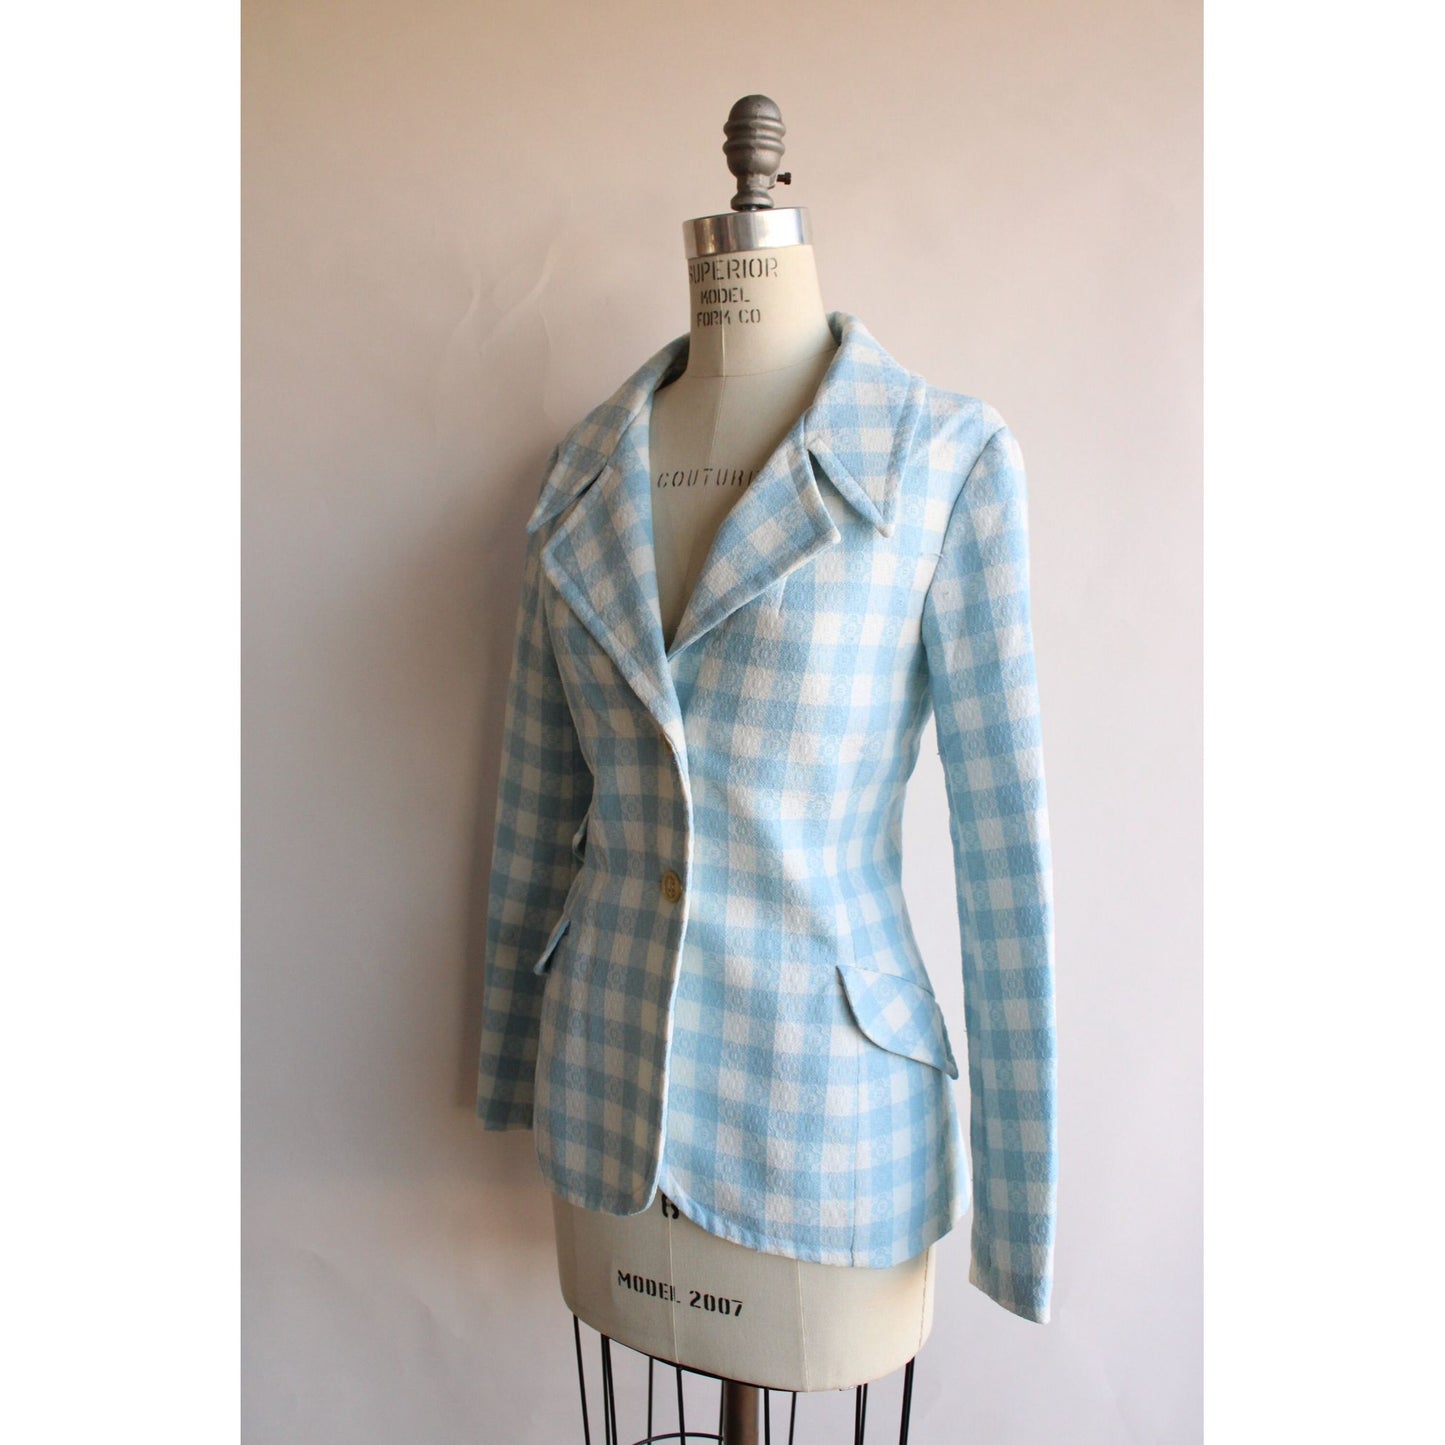 Vintage 1970s Suit ,Pants and Jacket Blue and White Check Two Piece Suit ,Jacket And Trousers Set